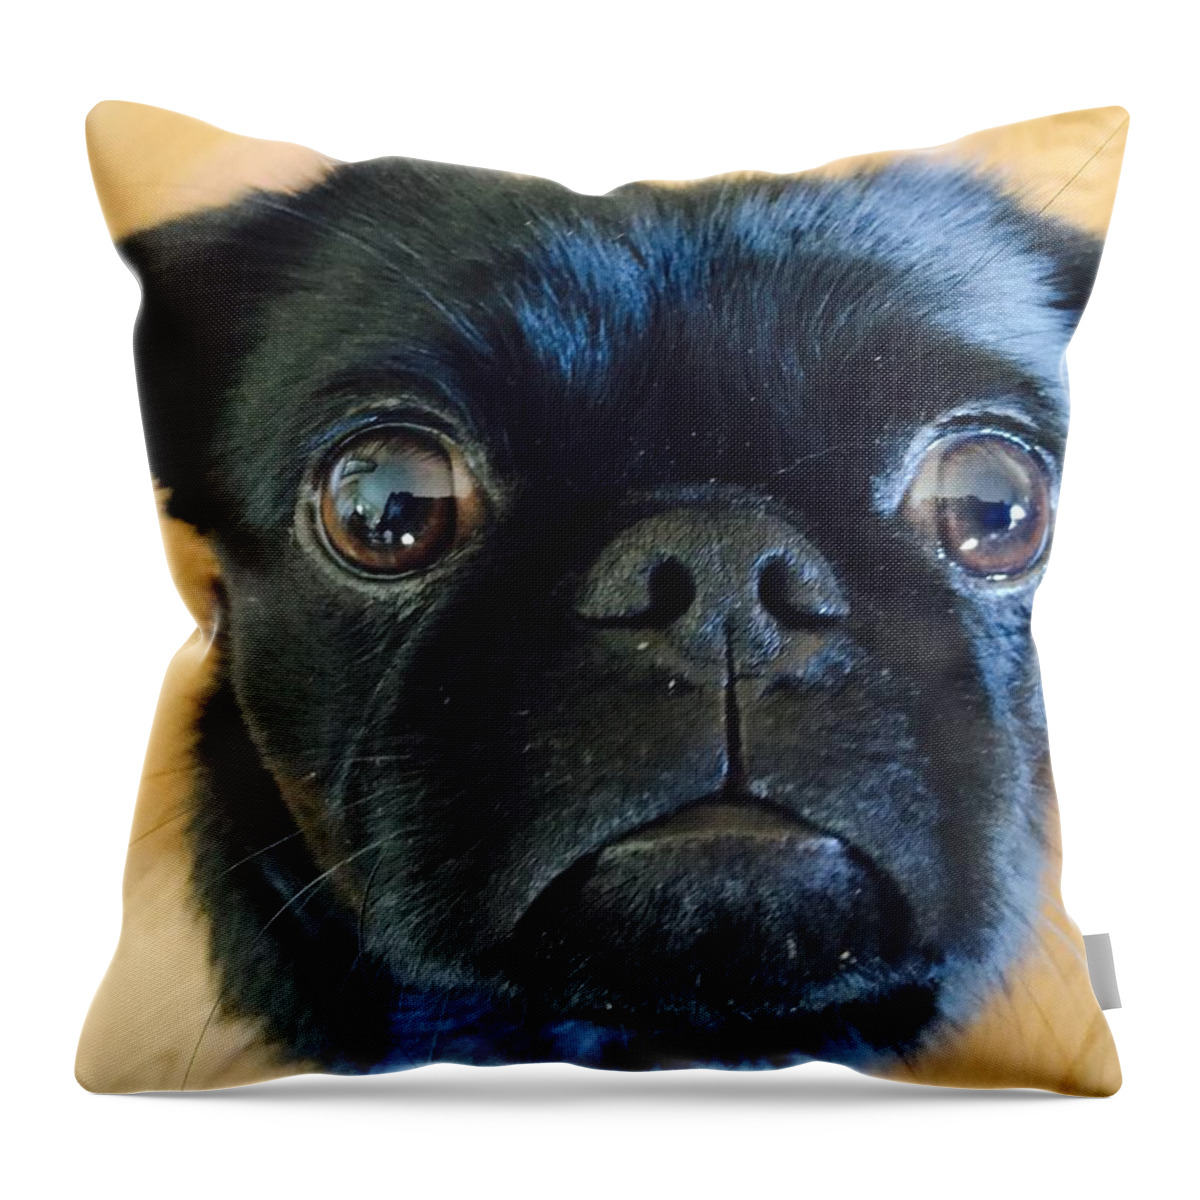 Pug Mix Throw Pillow featuring the photograph Honestly by Paula Brown